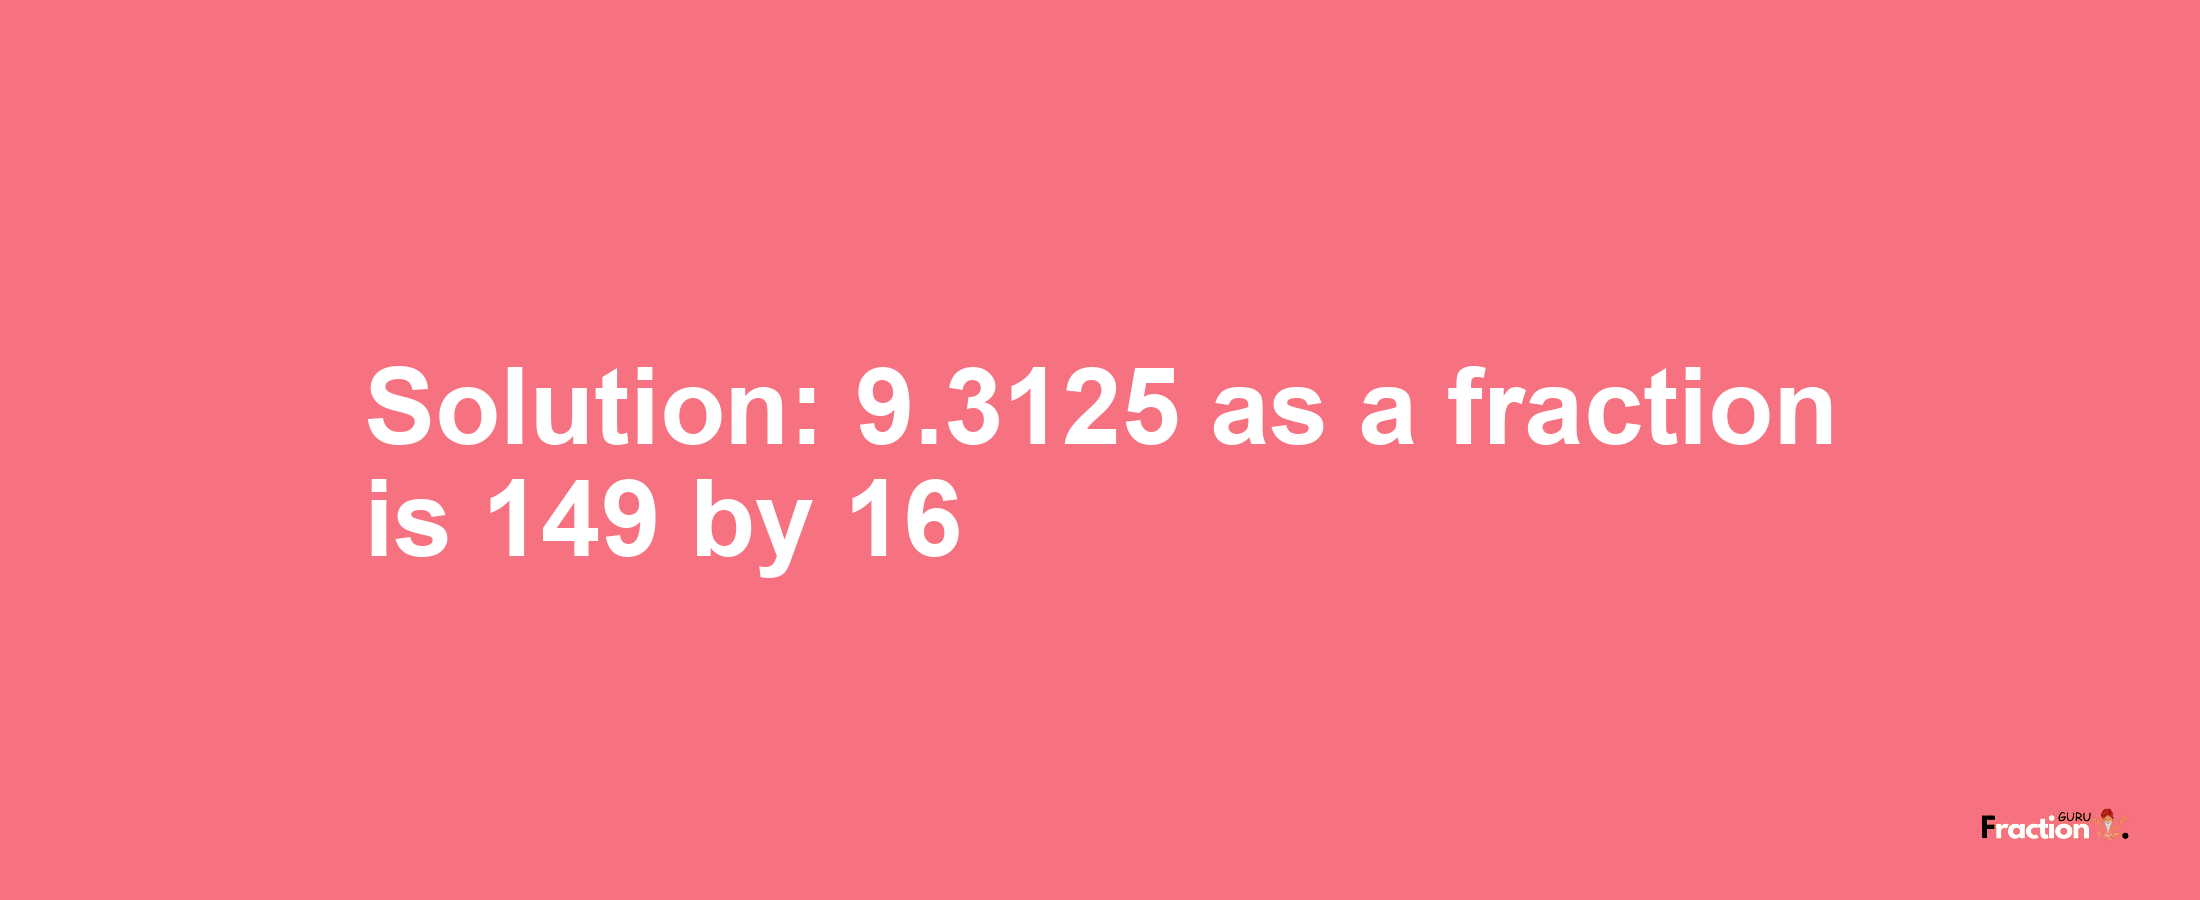 Solution:9.3125 as a fraction is 149/16